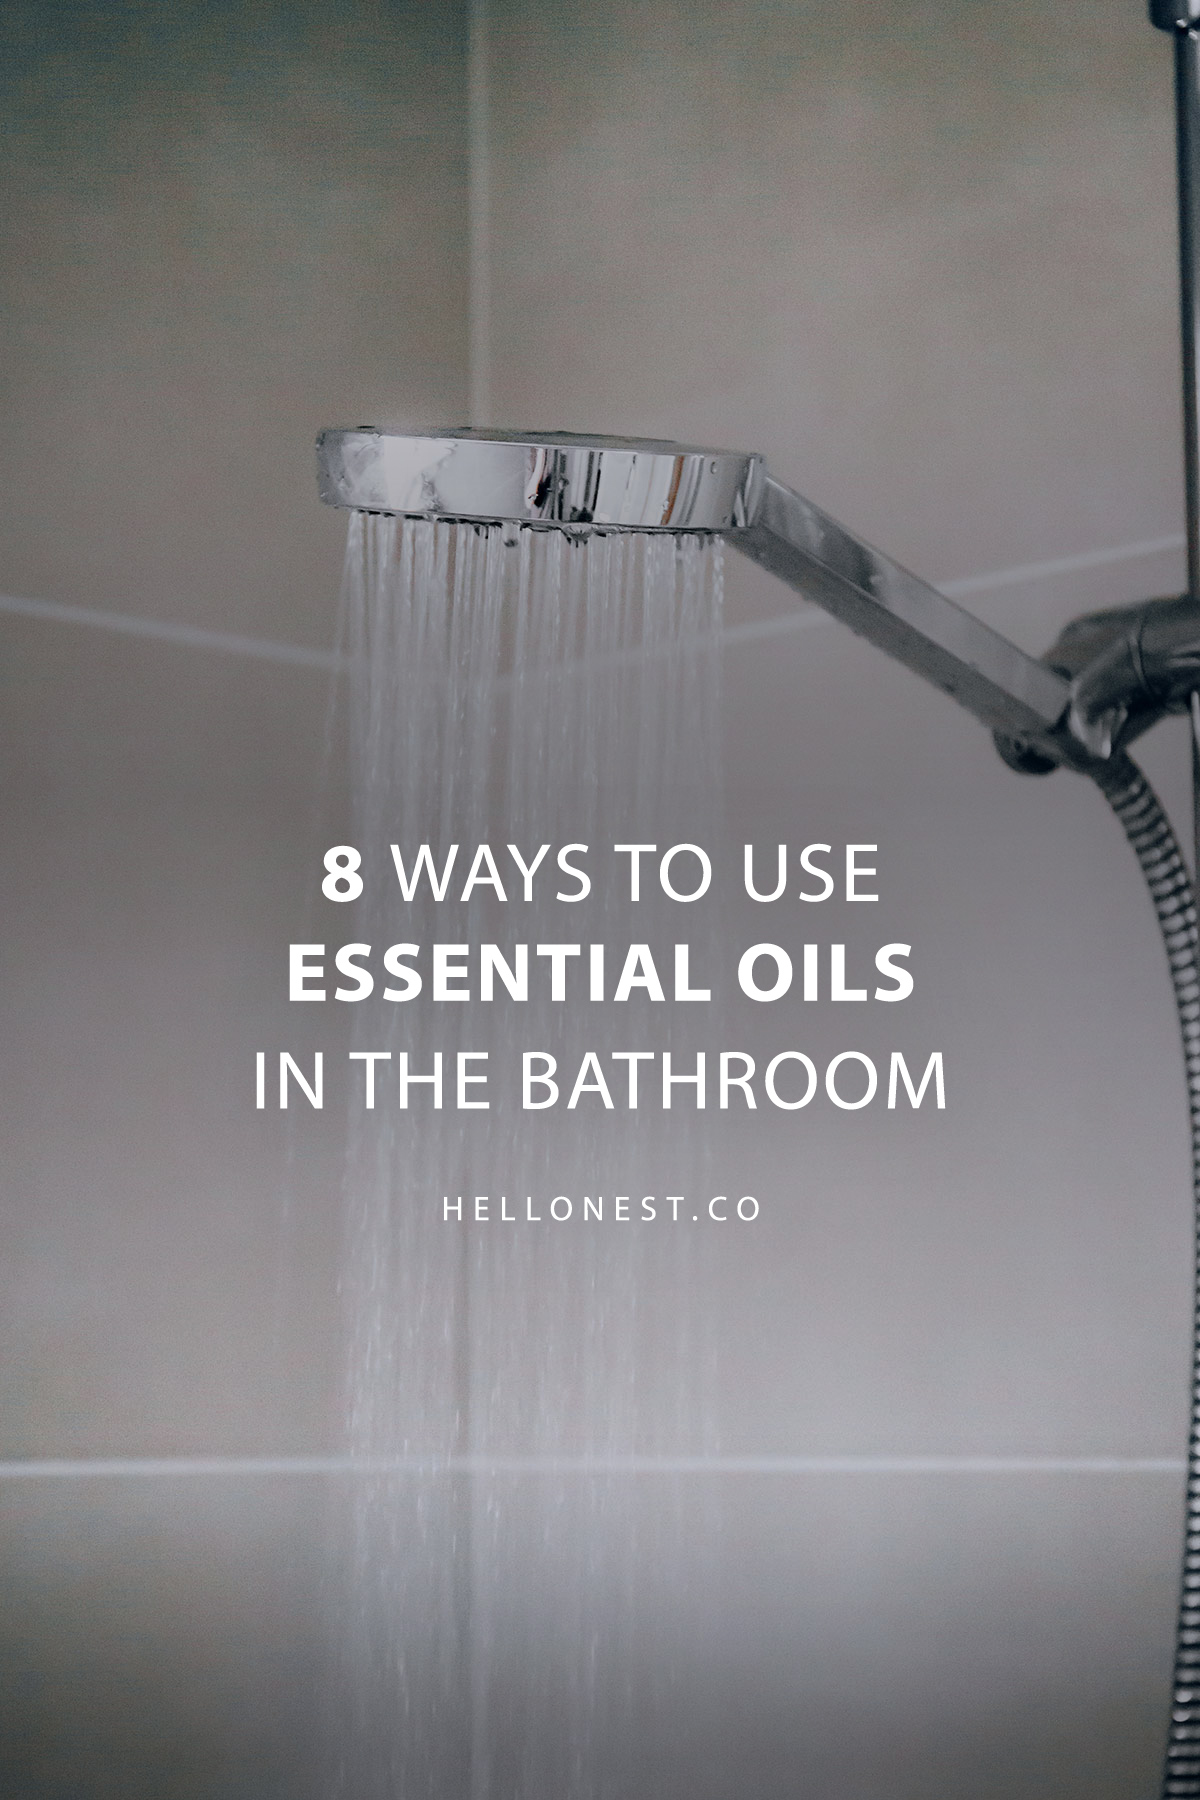 8 Ways to Use Essential Oils in the Bathroom